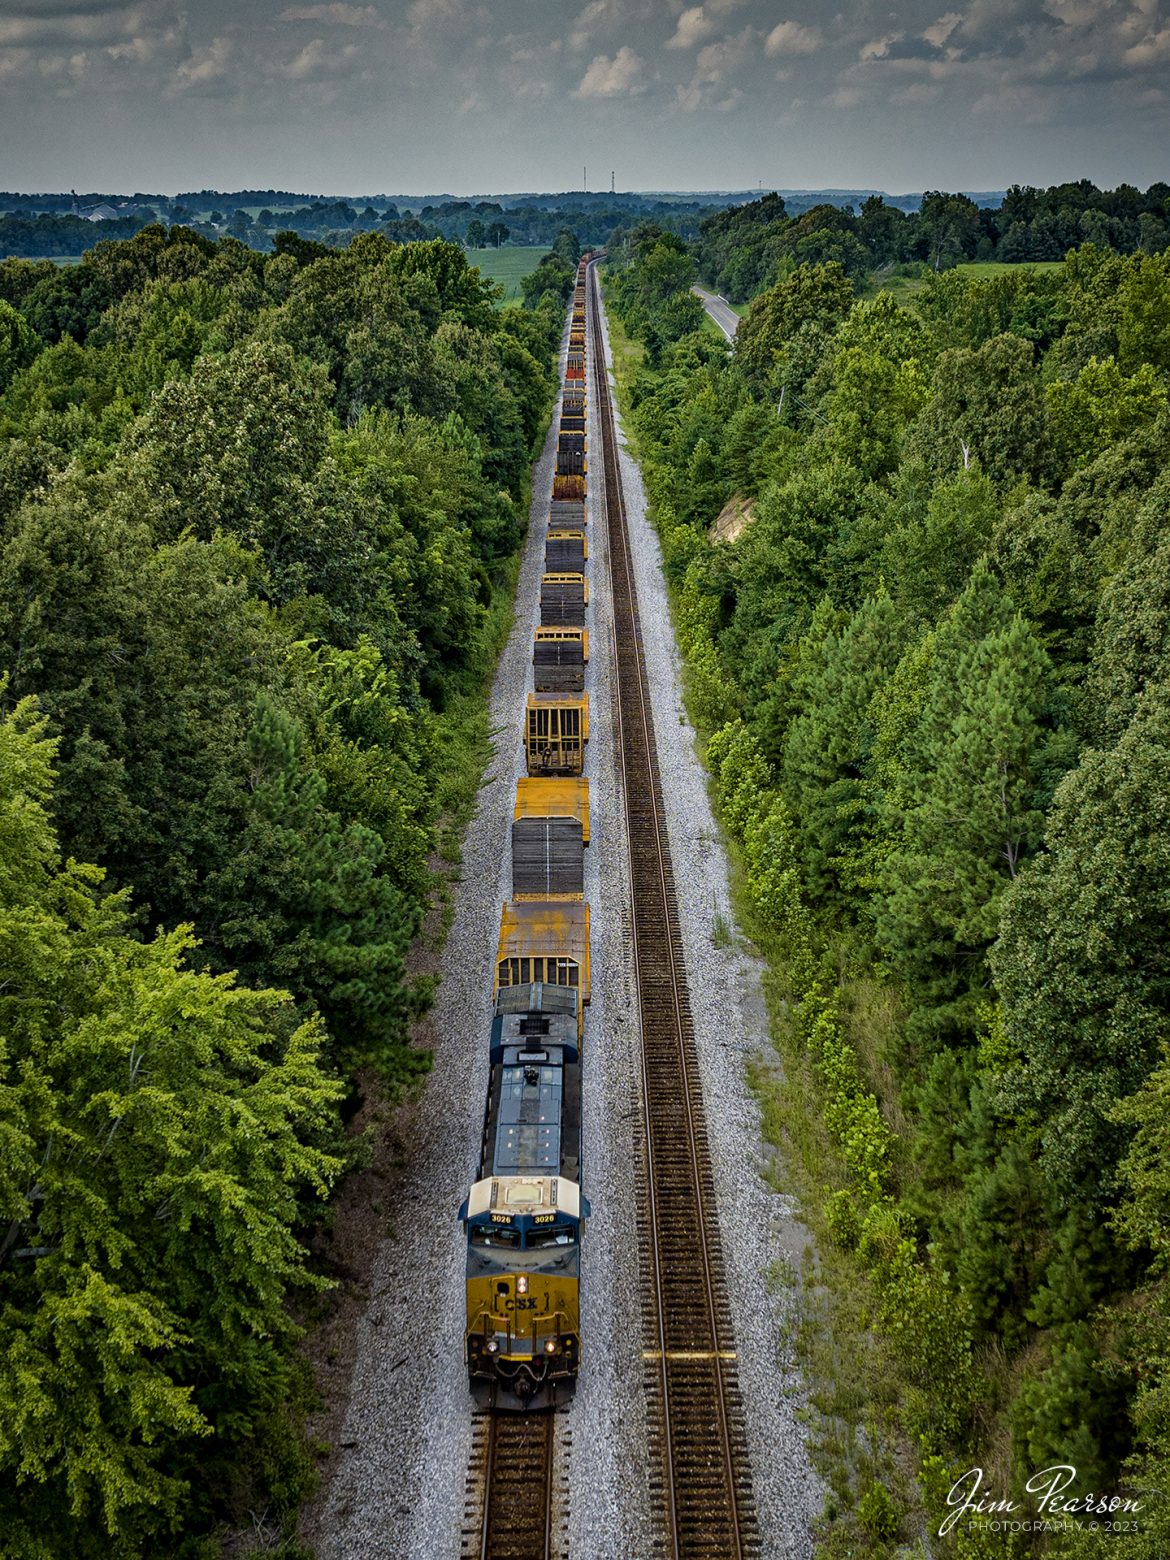 CSXT 3026 leads S980-07, a high/wide move of sheet metal, south on the CSX Henderson Subdivision on August 8th, 2023. There was a total of 99 bulkhead flat cars on the train, each loaded with 8-10 pieces of steel metal plates. I’m told they are bound for Panama City, Florida where the metal will be fabricated into industrial pipe at the Borusan Berg Pipe plant located there.

Tech Info: DJI Mavic 3 Classic Drone, RAW, 24mm, f/2.8, 1/1000, ISO 170.

#trainphotography #railroadphotography #trains #railways #dronephotography #trainphotographer #railroadphotographer #jimpearsonphotography #trains #csxt #mavic3classic #drones #trainsfromtheair #trainsfromadrone #KentuckyTrains